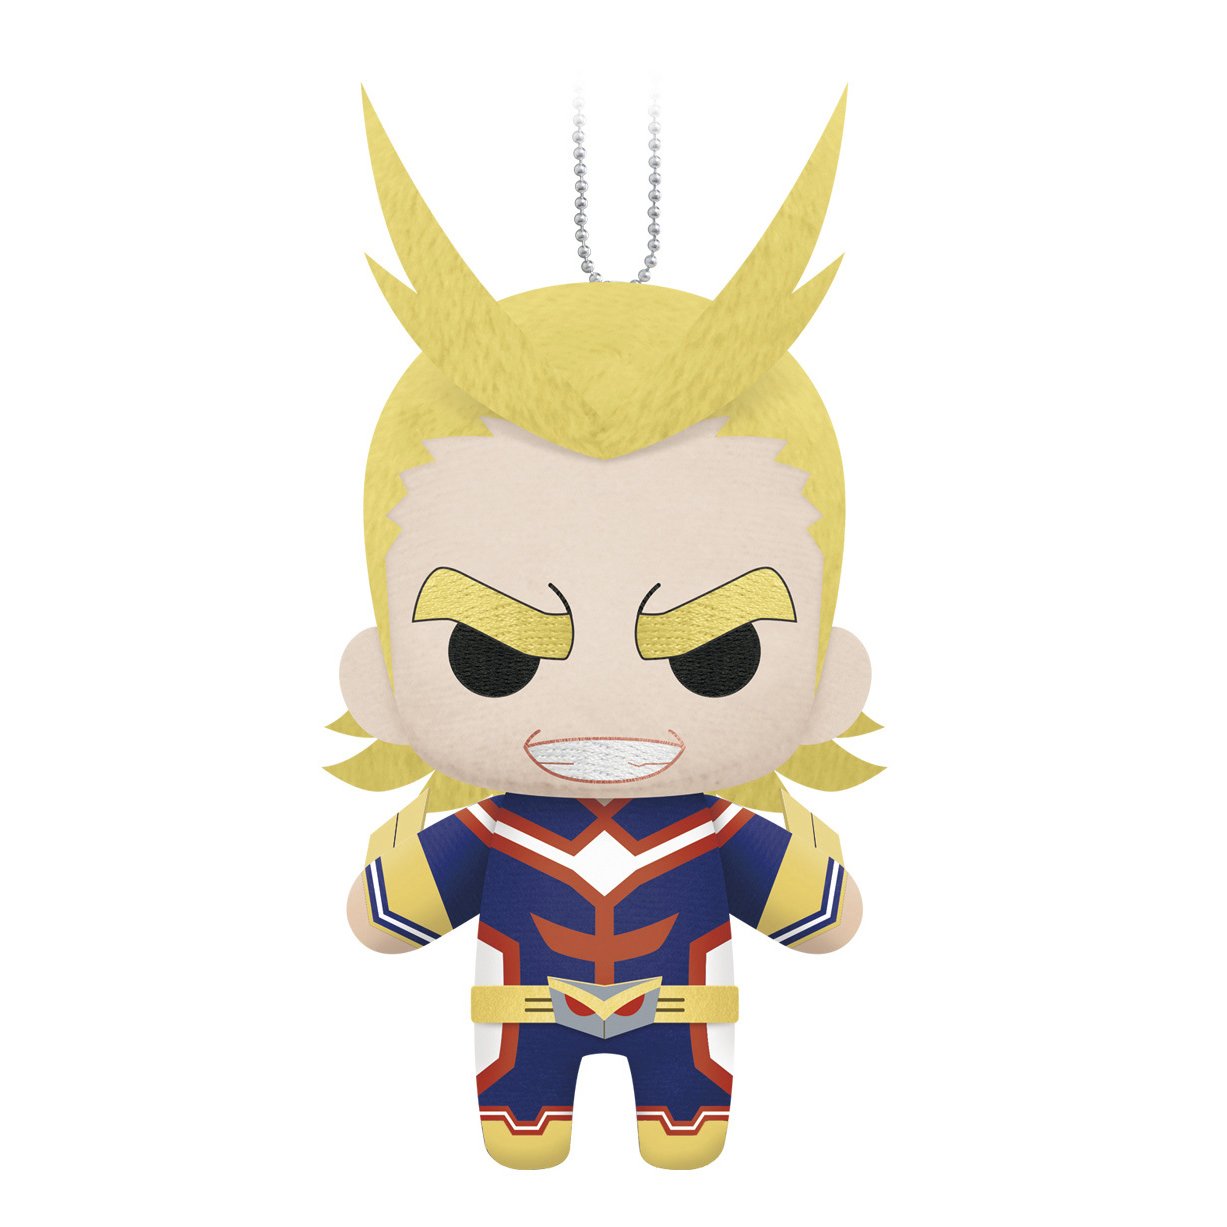 Little Buddy My Hero Academia All Might Plush Dangler 6" - Super Anime Store FREE SHIPPING FAST SHIPPING USA